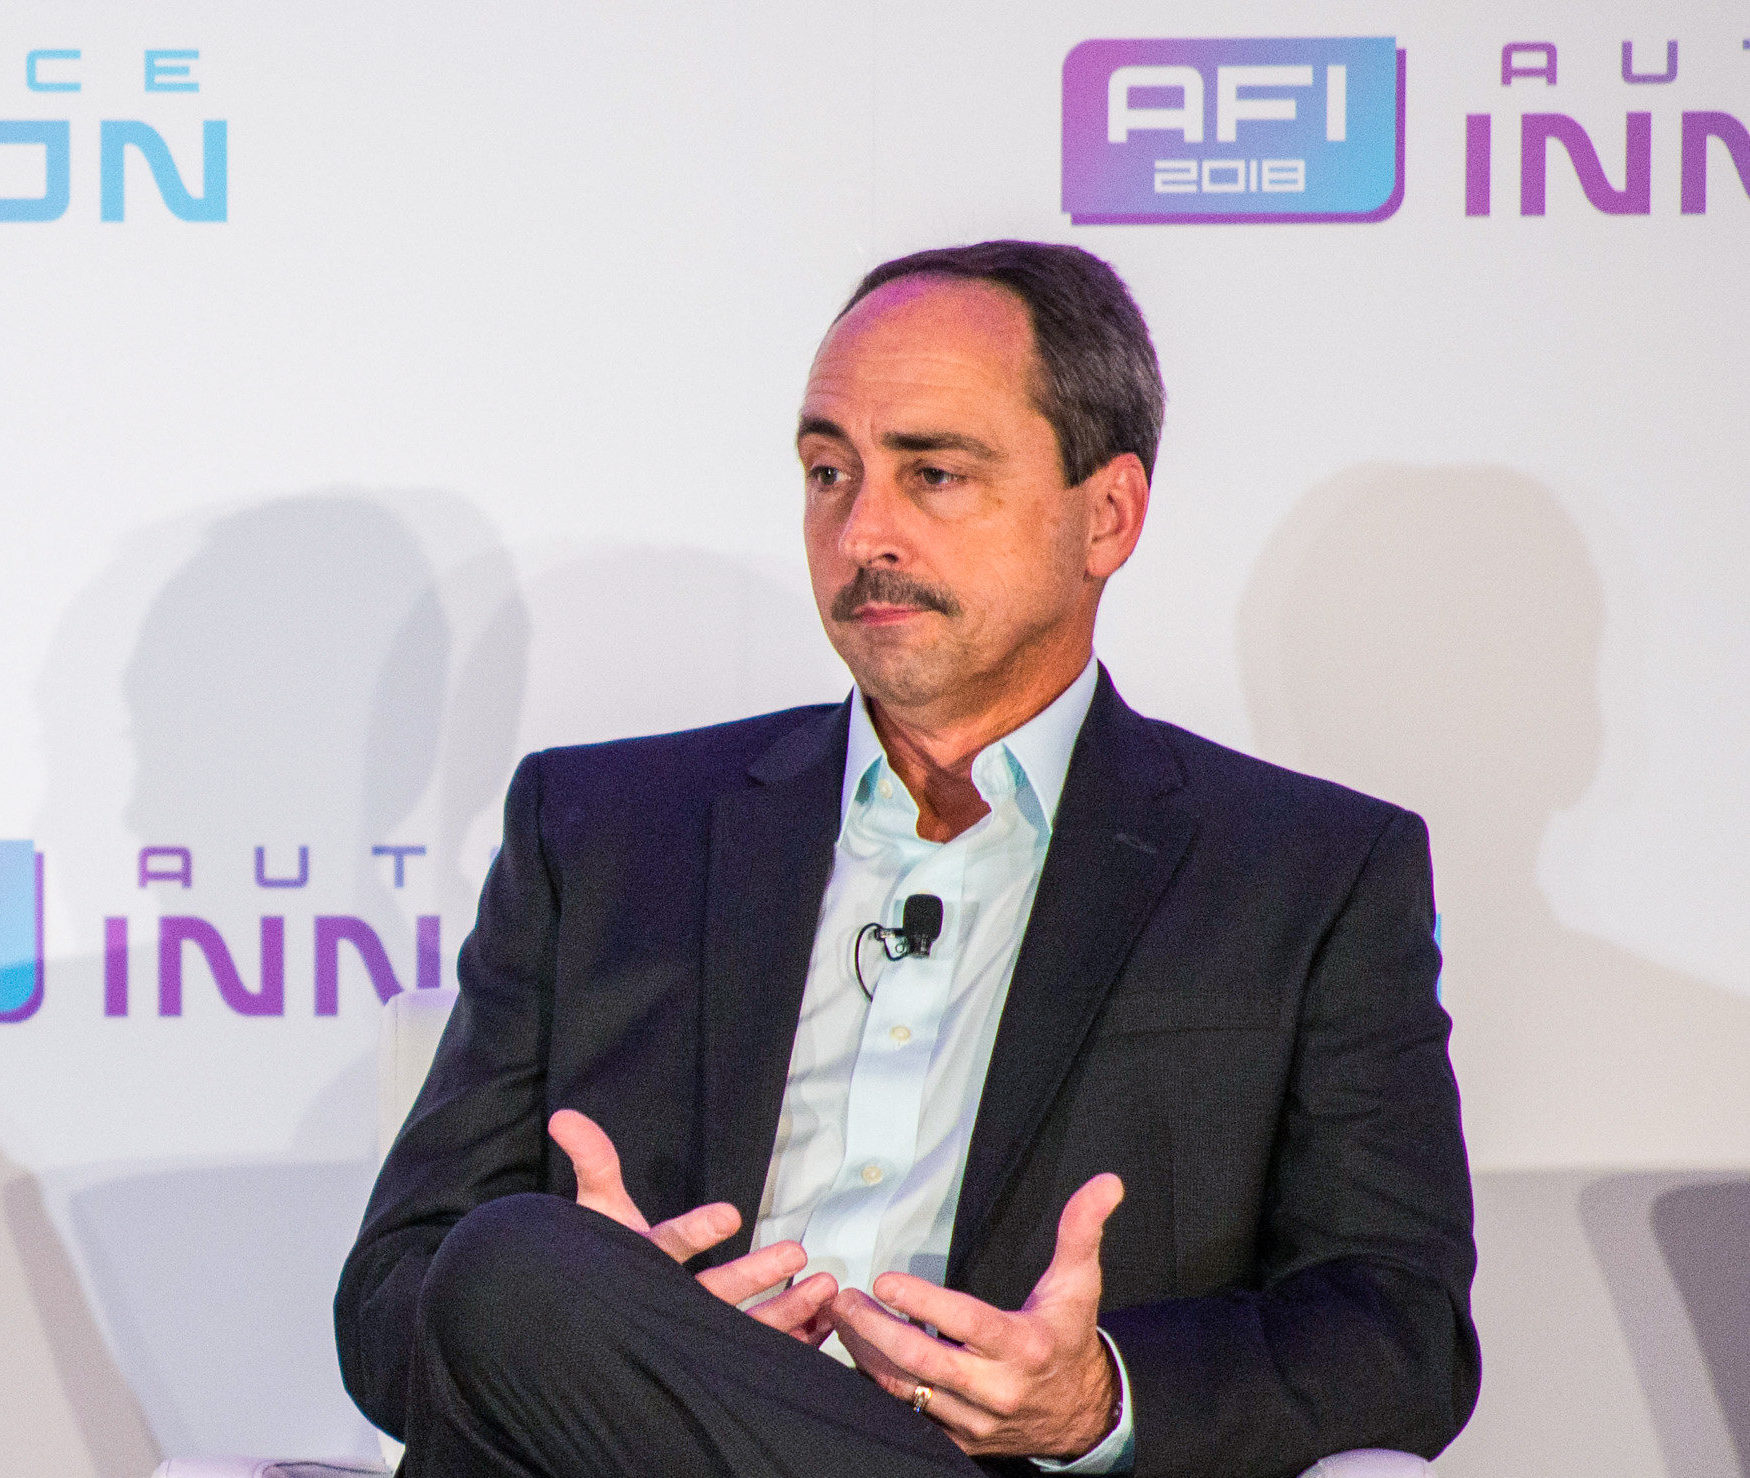 Larry Dominique, president and chief executive at Group PSA North America, sits down for a "fireside chat" at Auto Finance Innovation 2018 in San Francisco. (Photo by Lensology.net